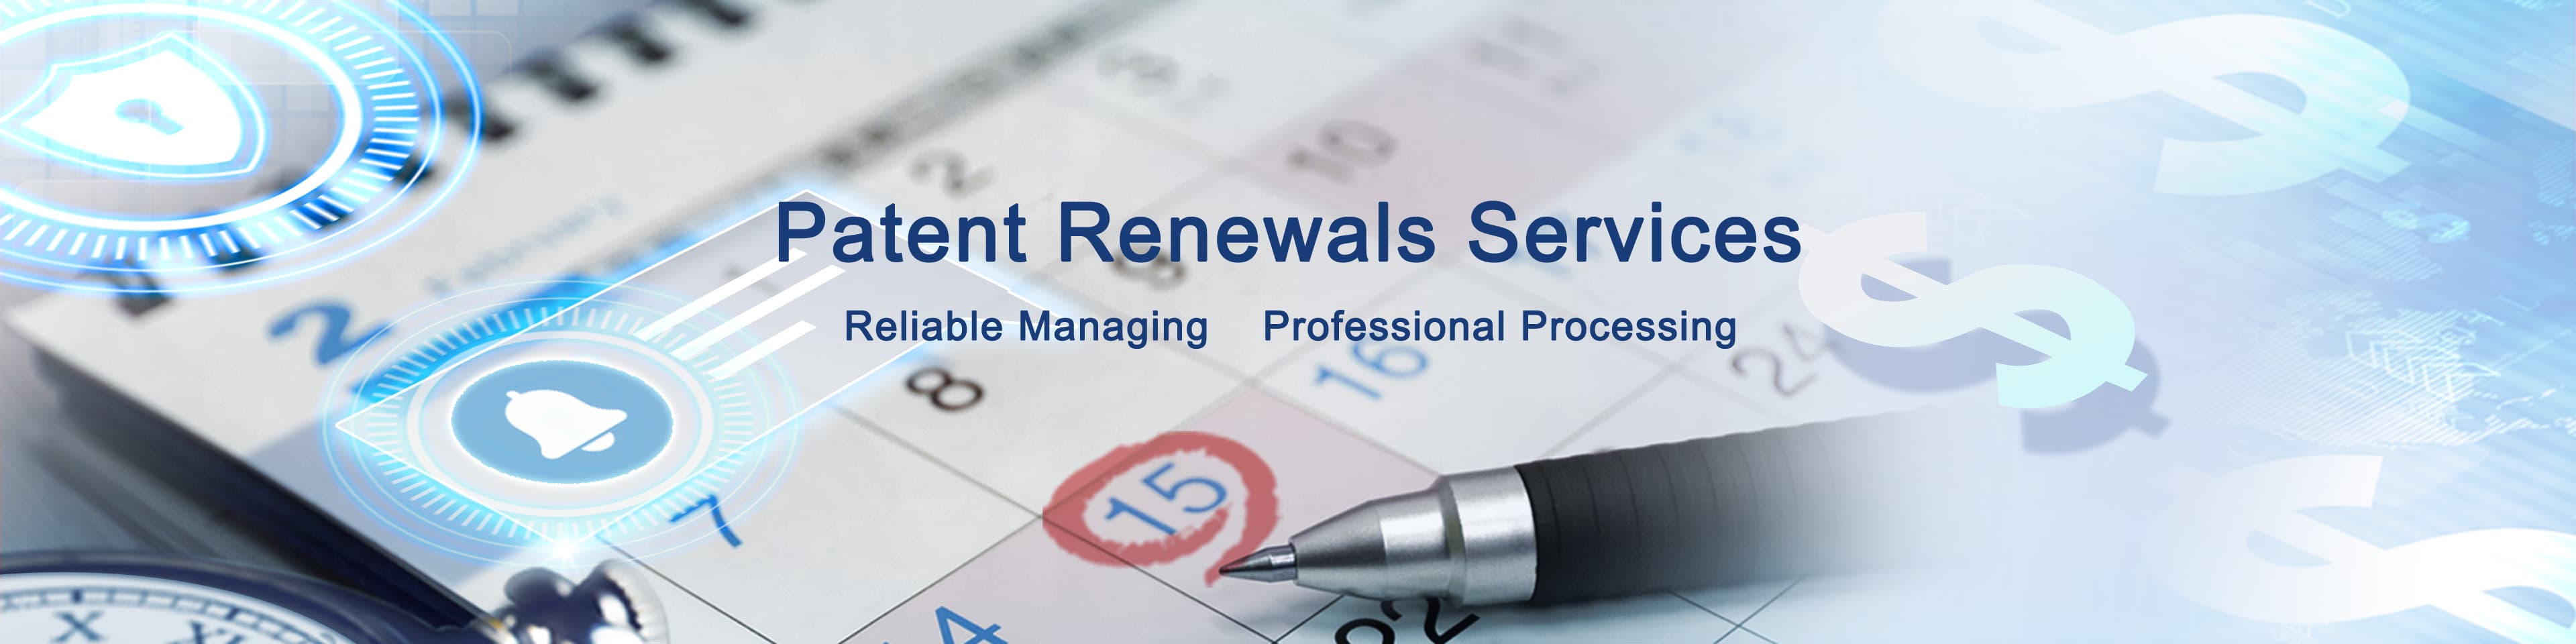 Patent Renewals Services - Reliable Managing / Professional Processing.